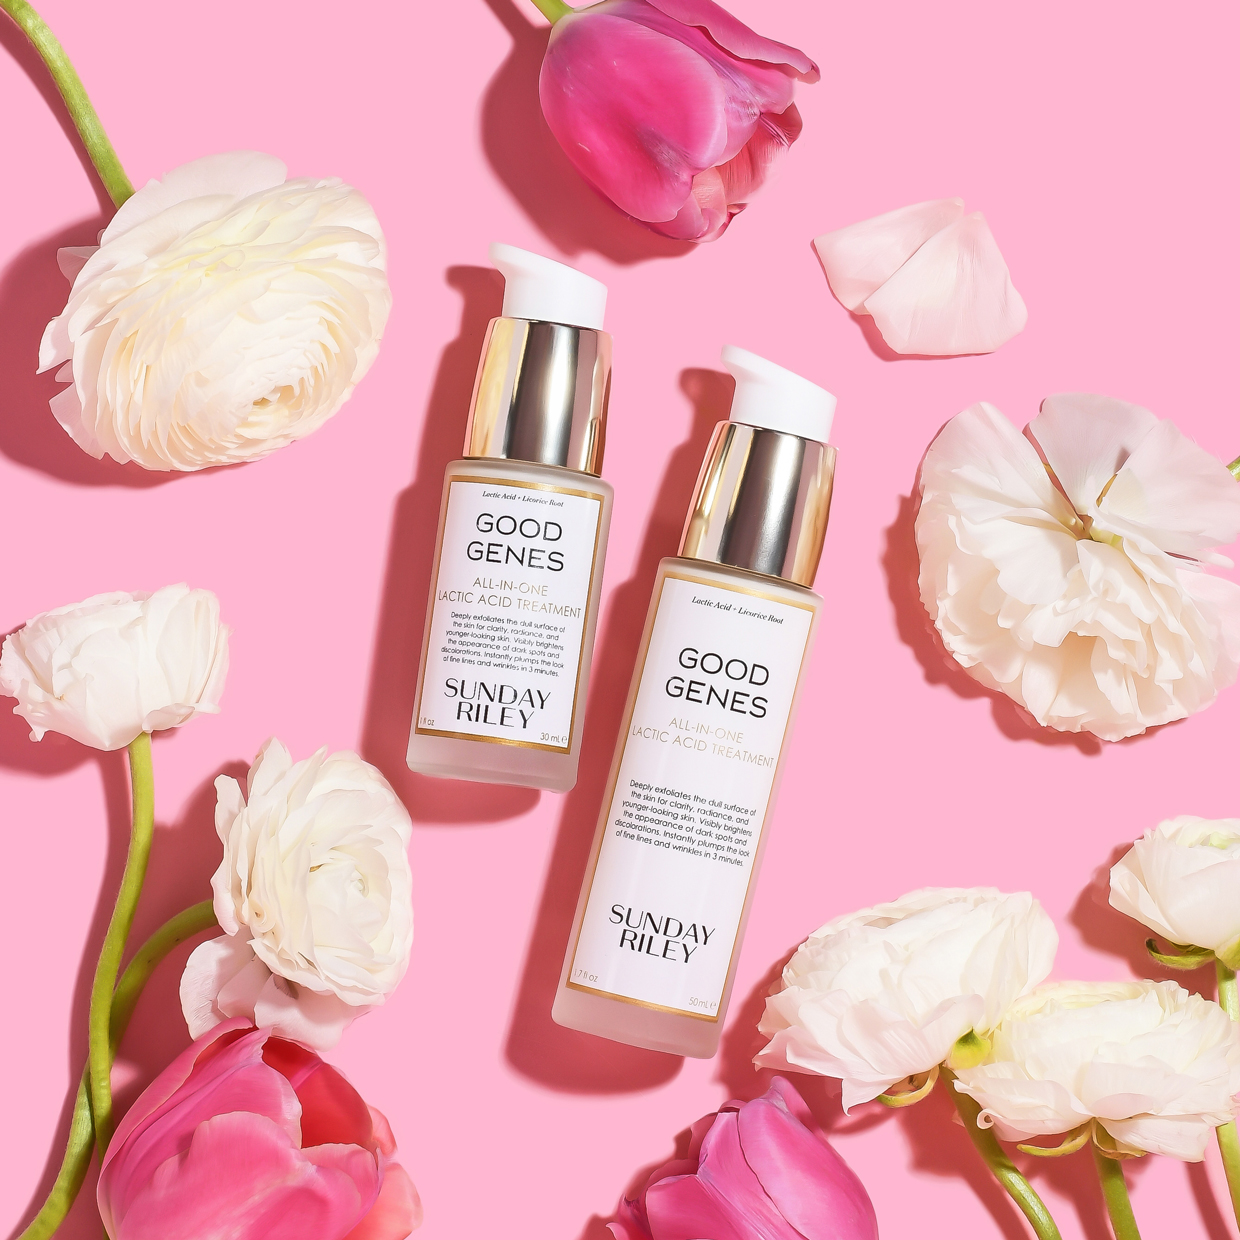 Good Genes skincare product on pink background with flowers